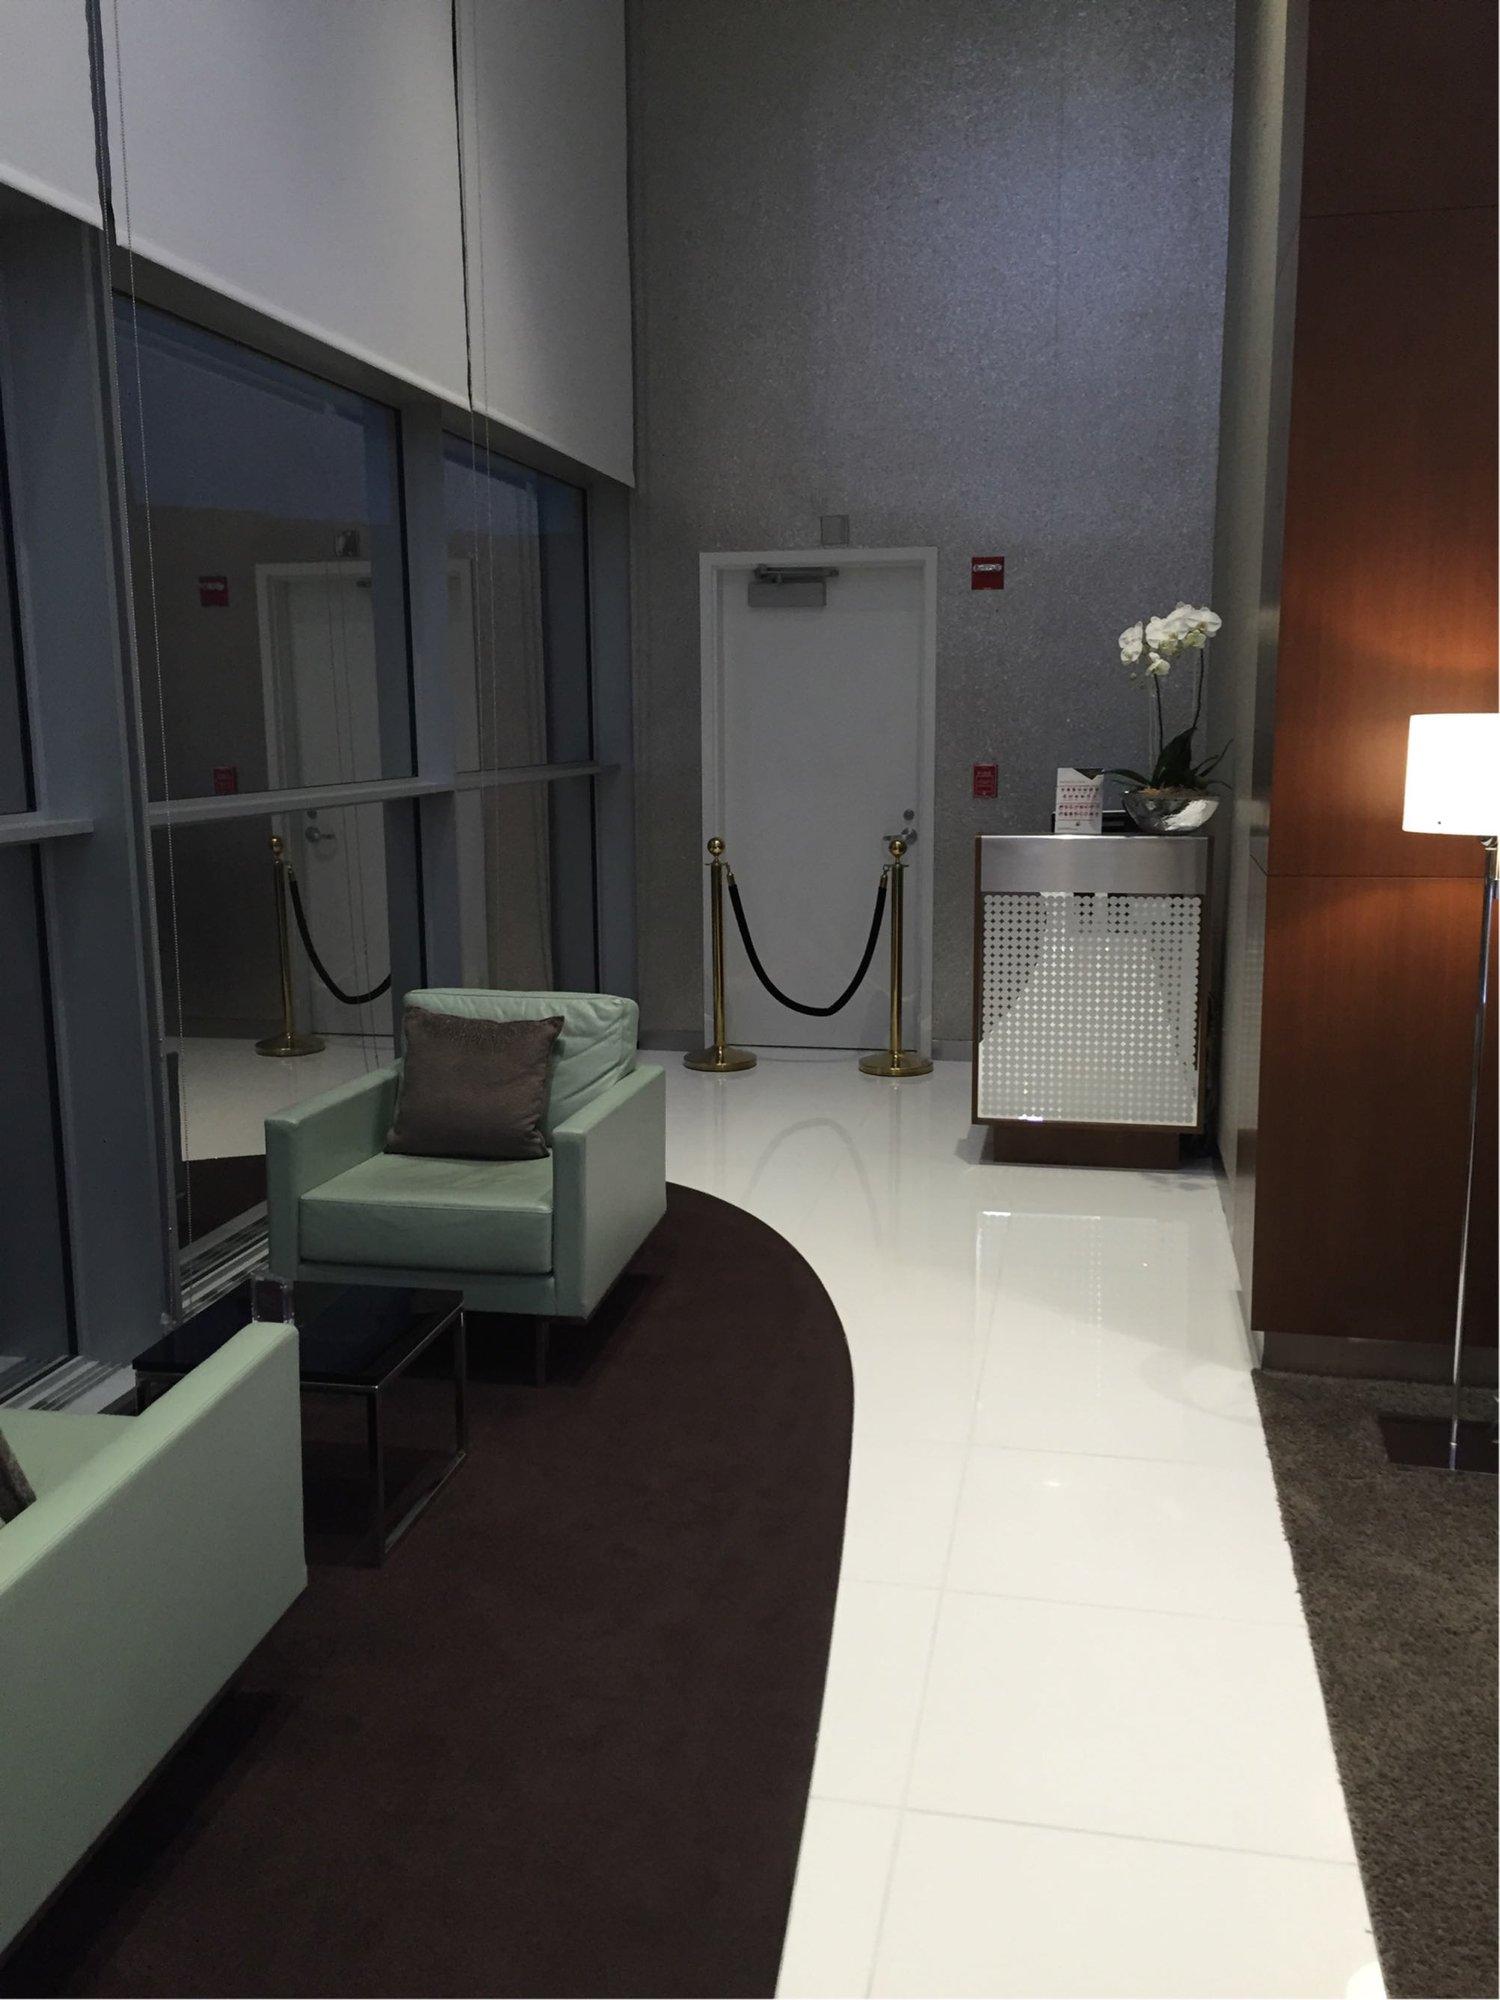 Etihad Airways First & Business Class Lounge image 9 of 17